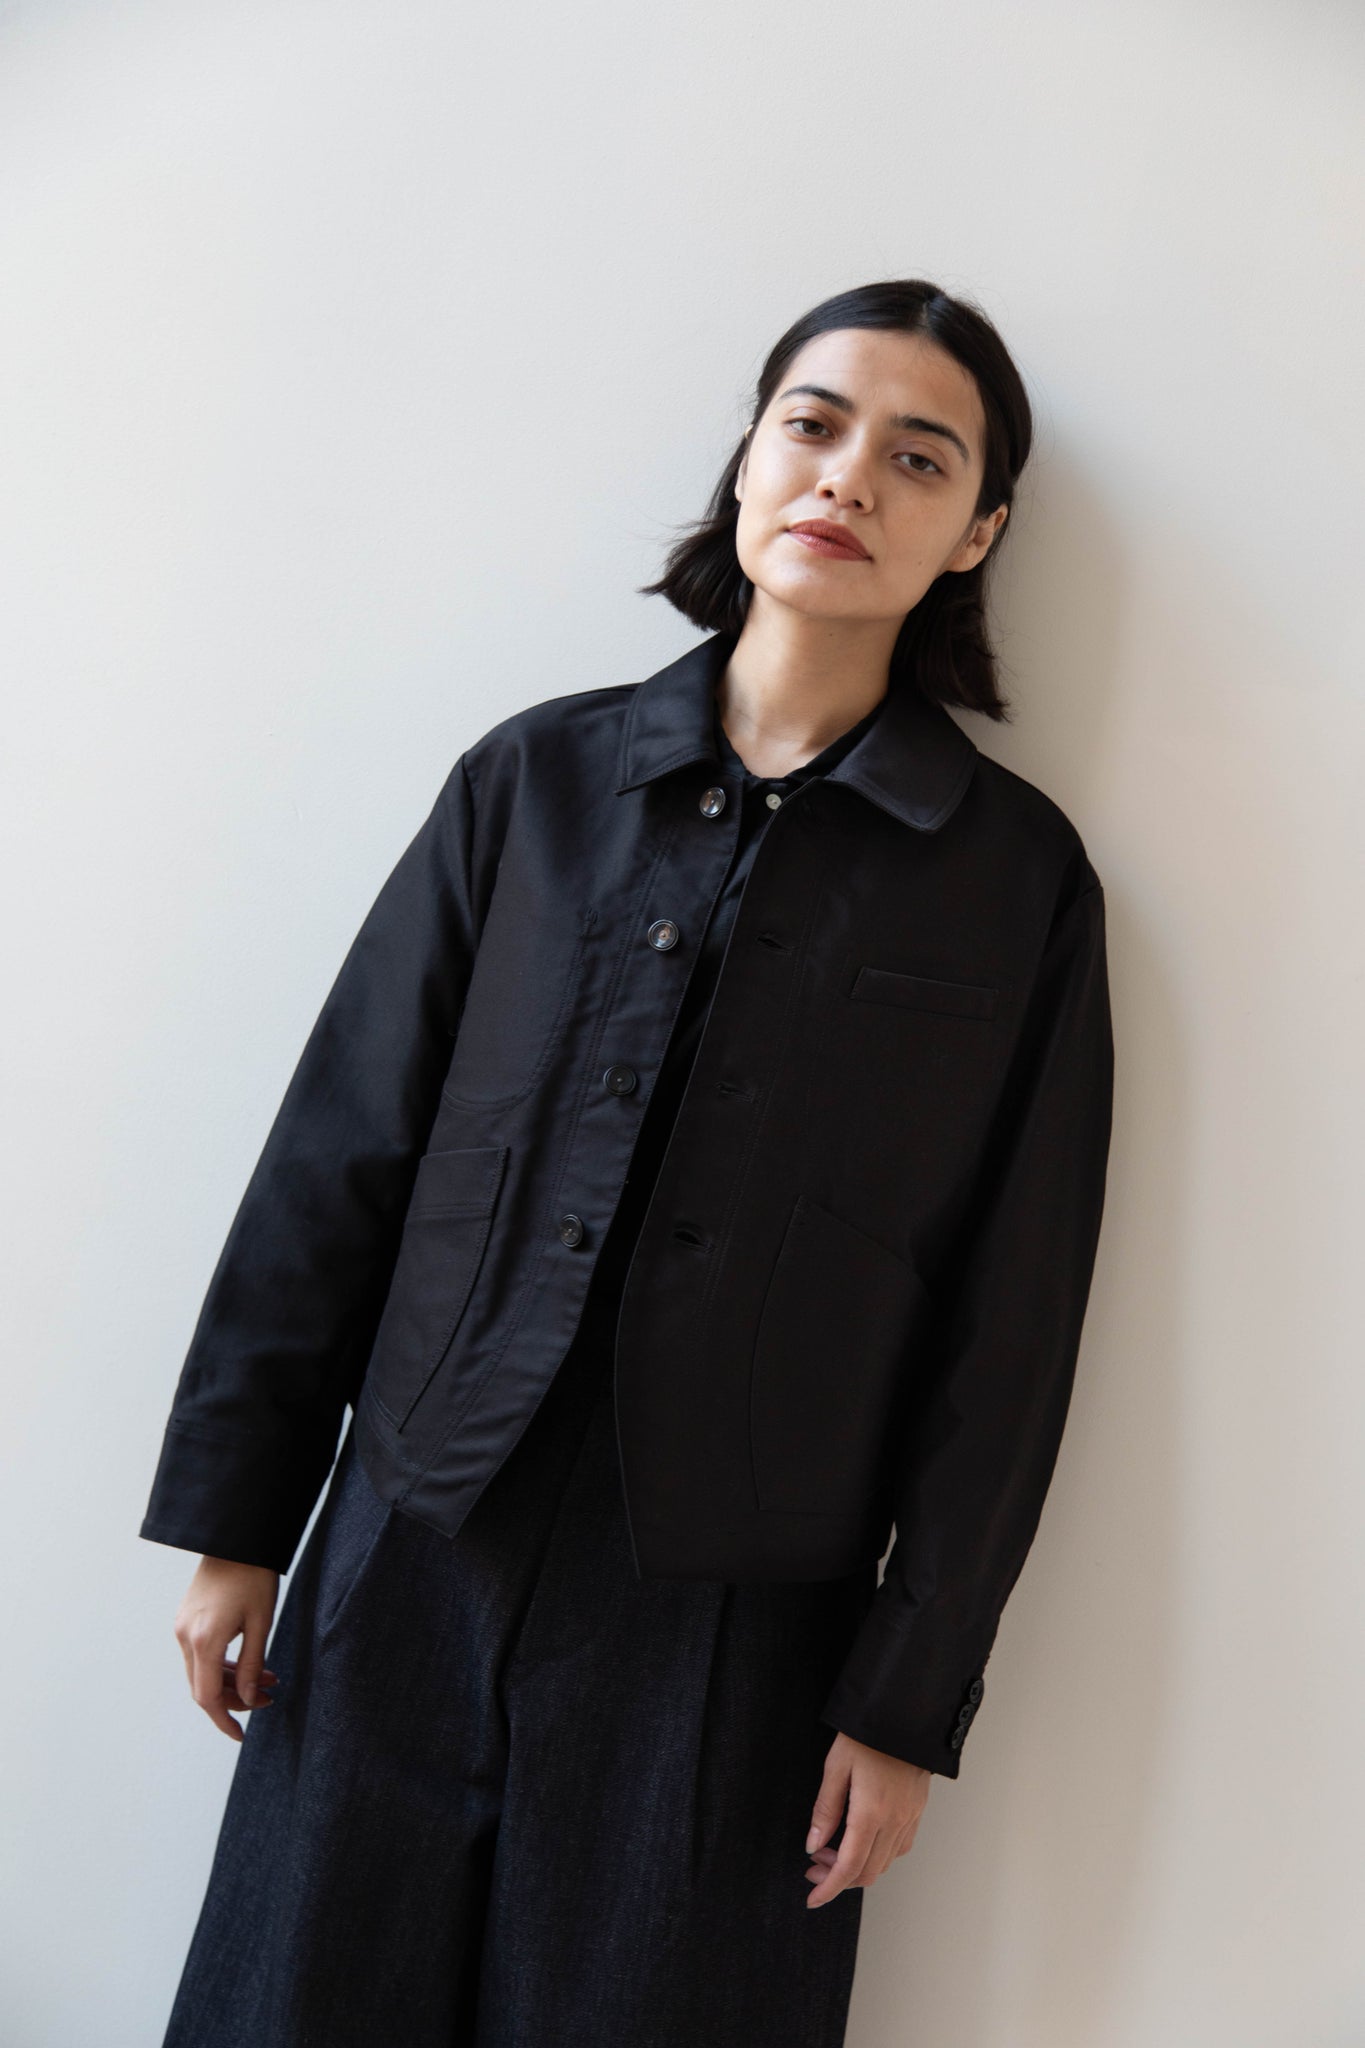 Aseedonclöud | Forest Keeper Jacket in Black